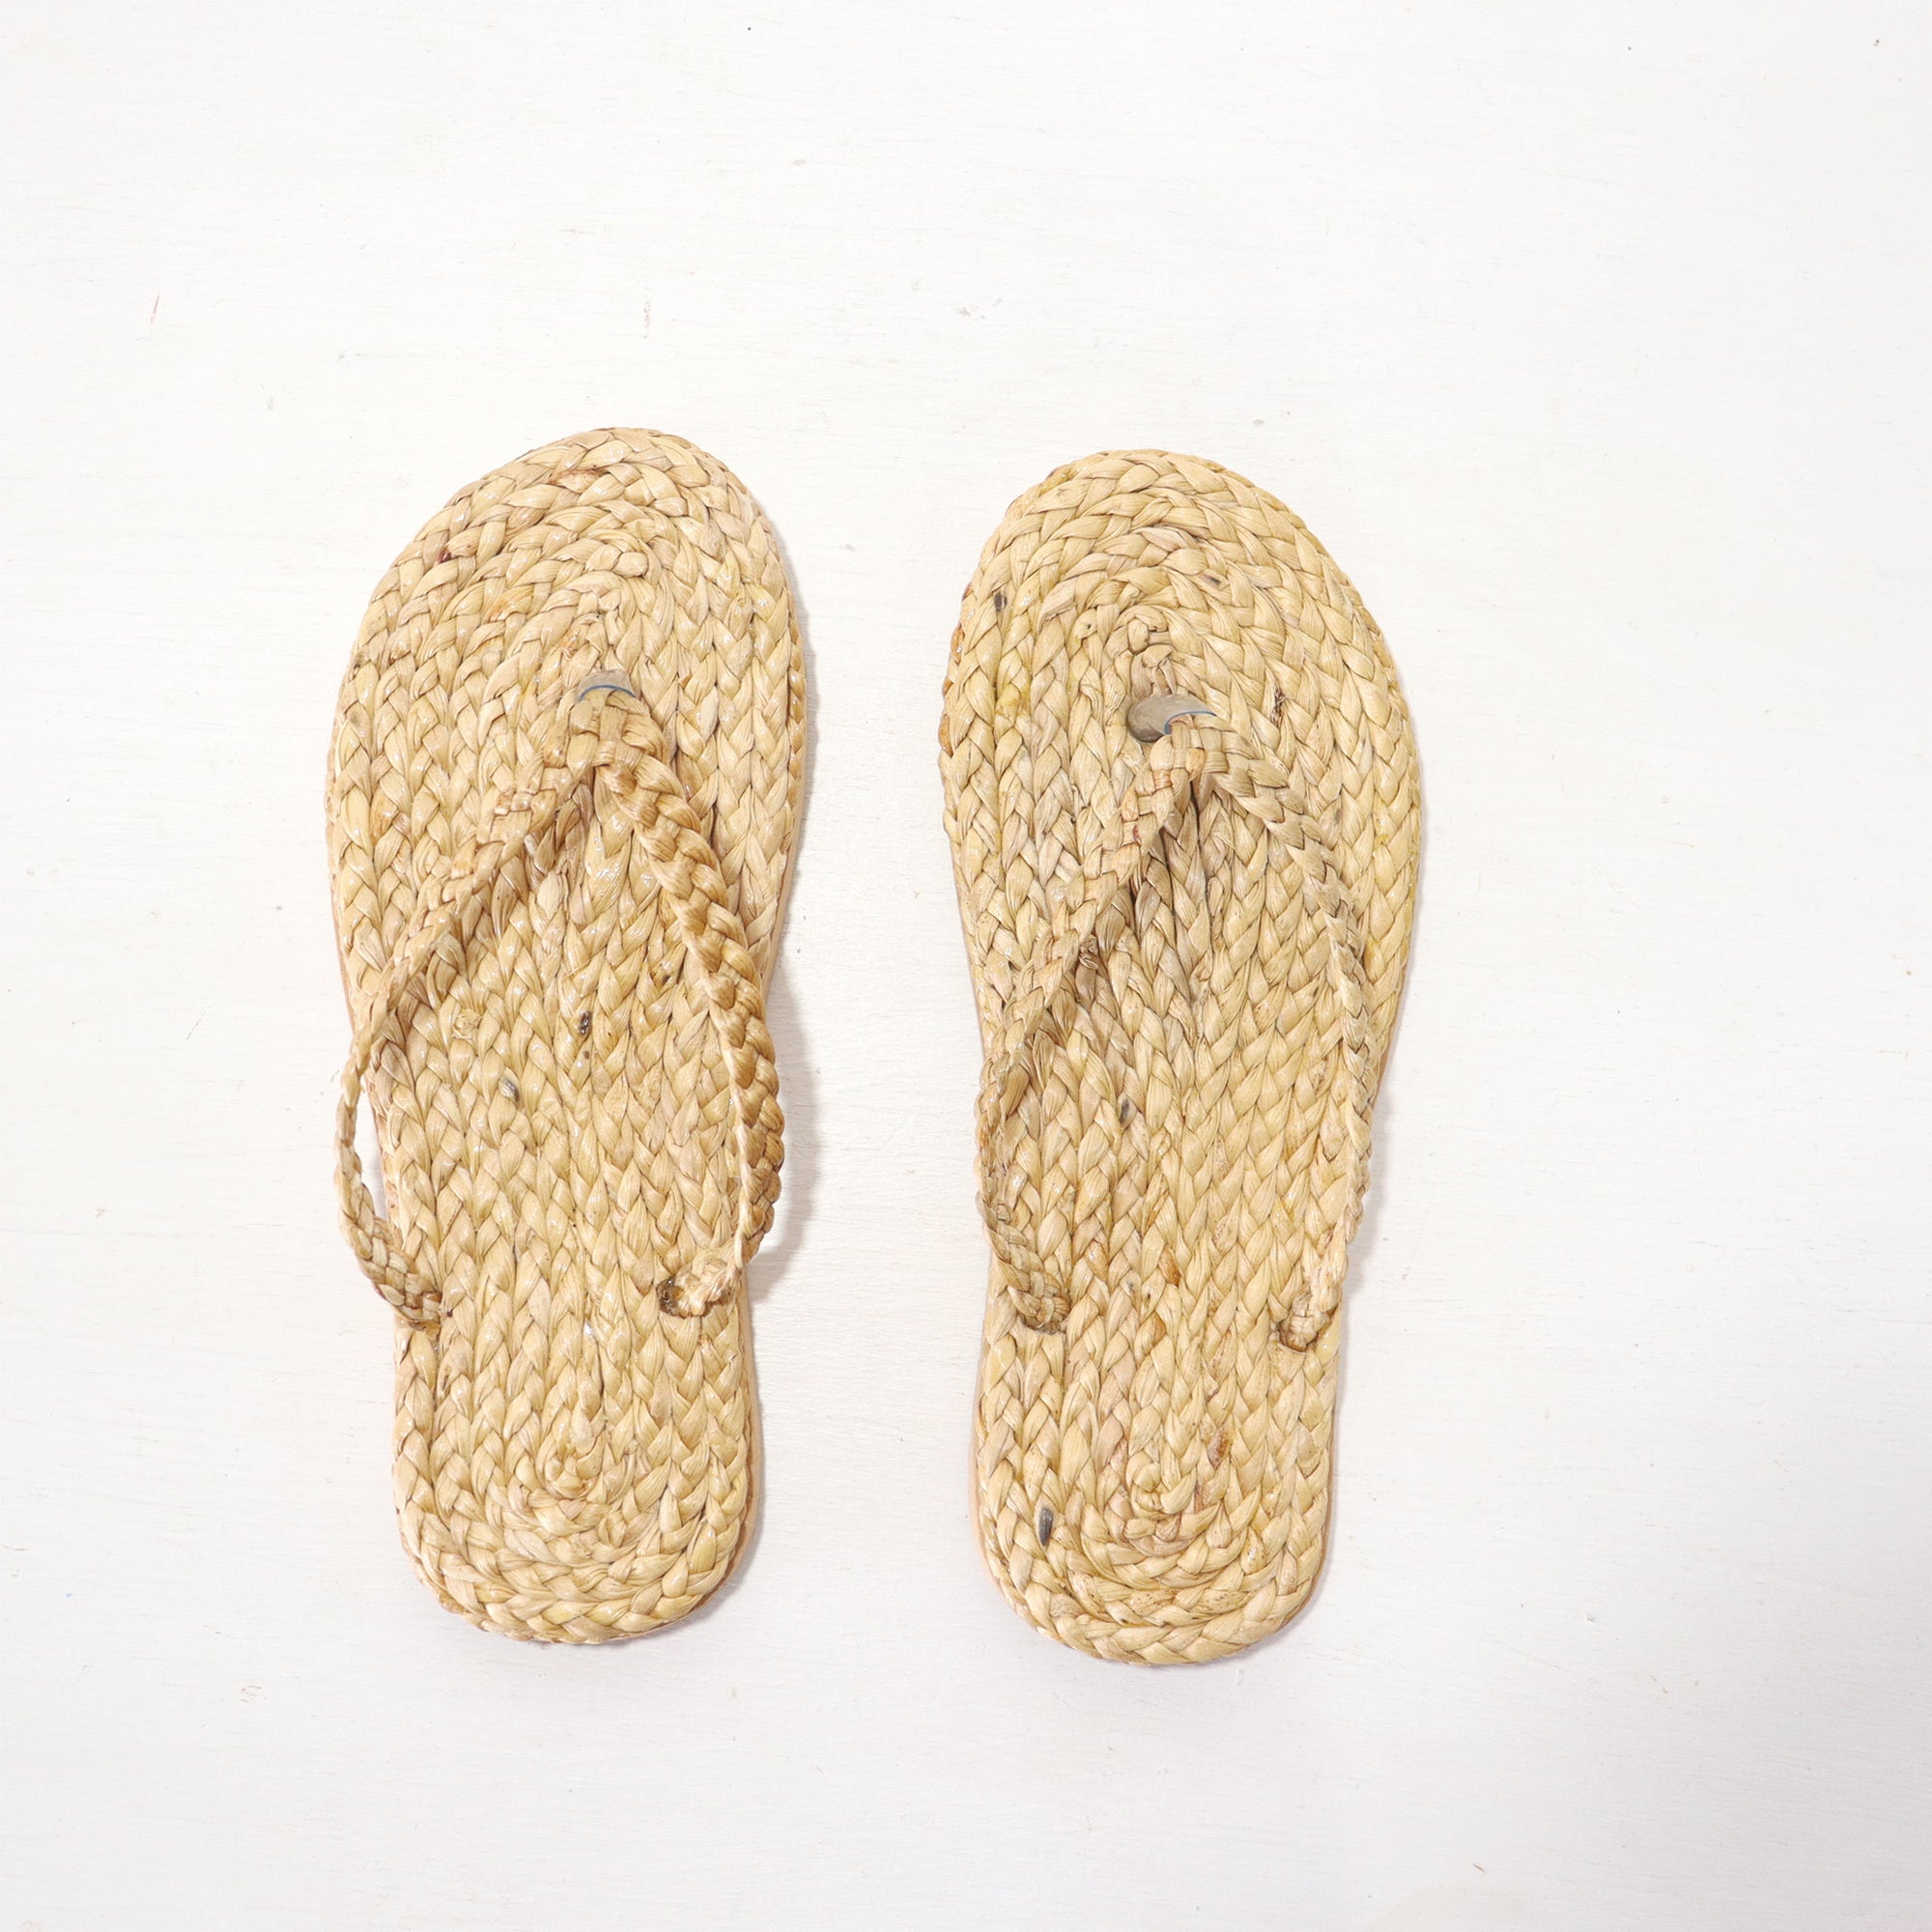 PU NI PA - Straw Shoe Sustainable Style for Every Step